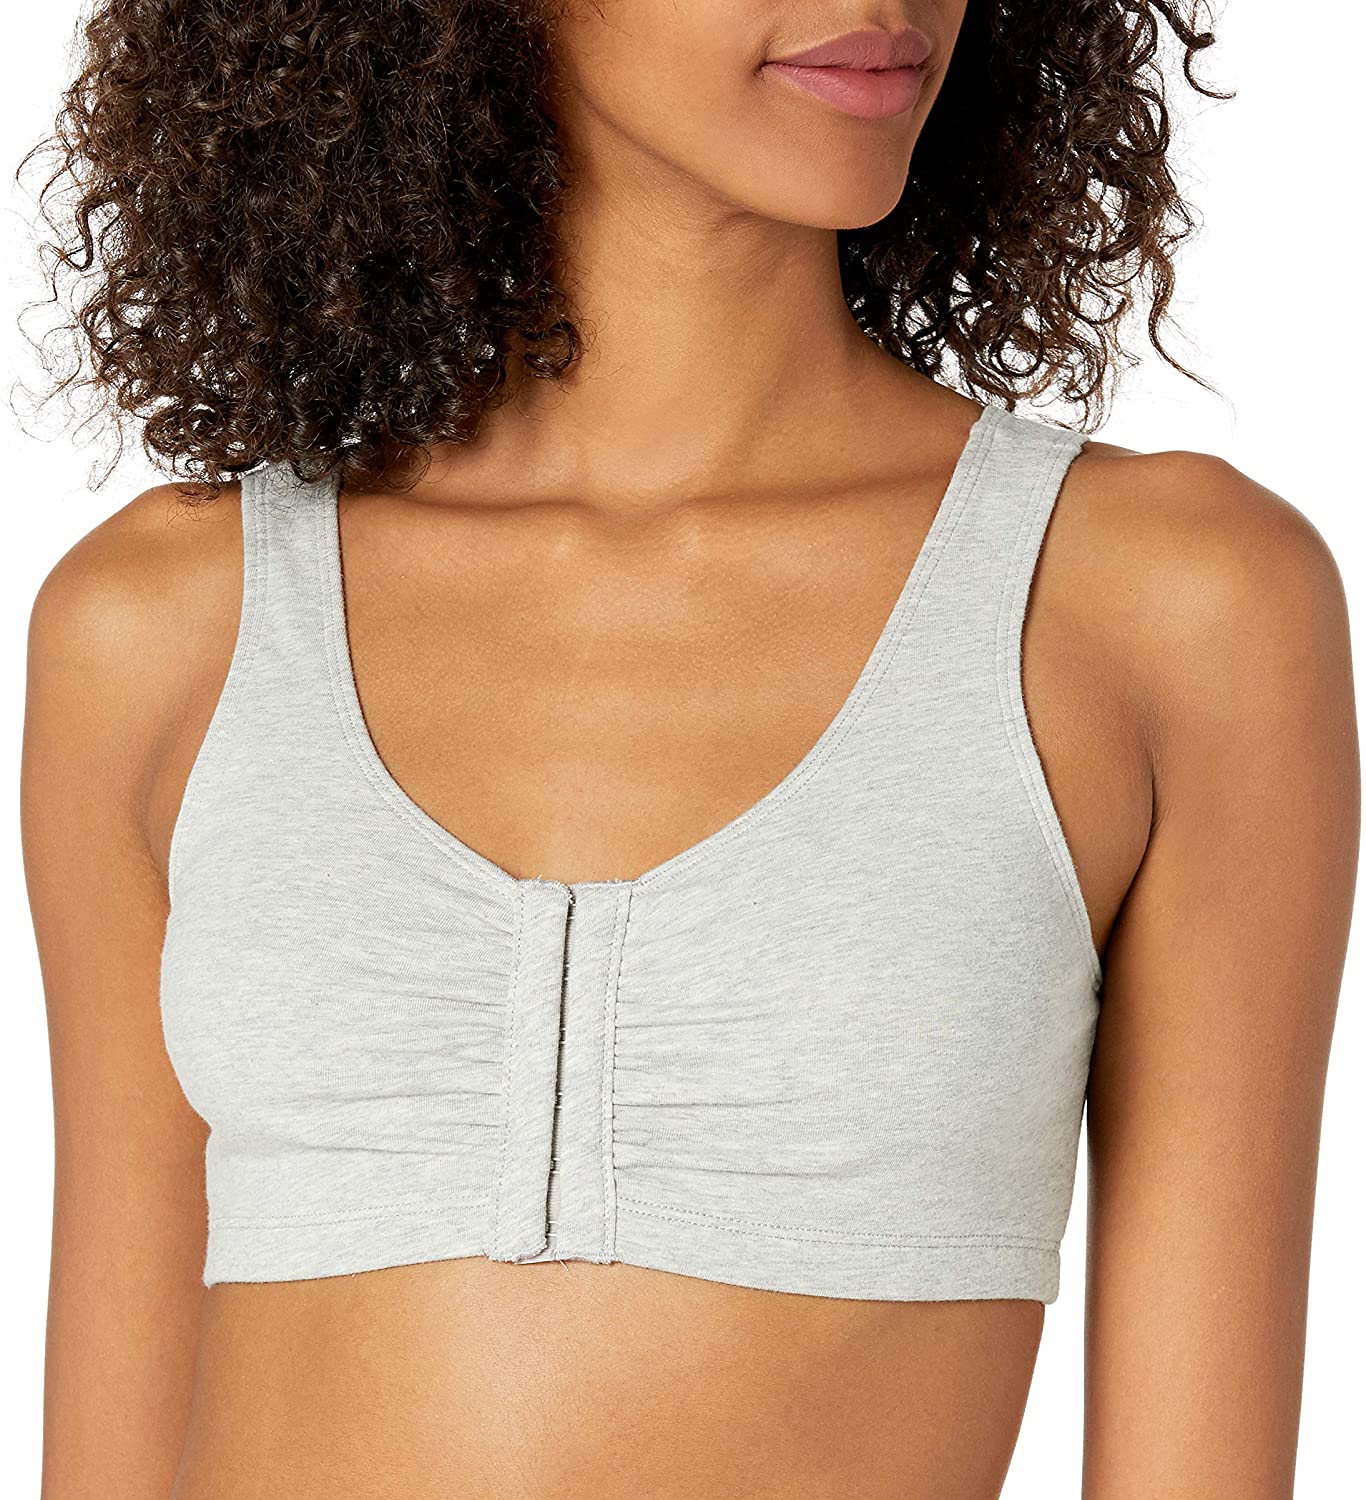  Fruit Of The Loom Womens Front Closure Cotton Sports Bra